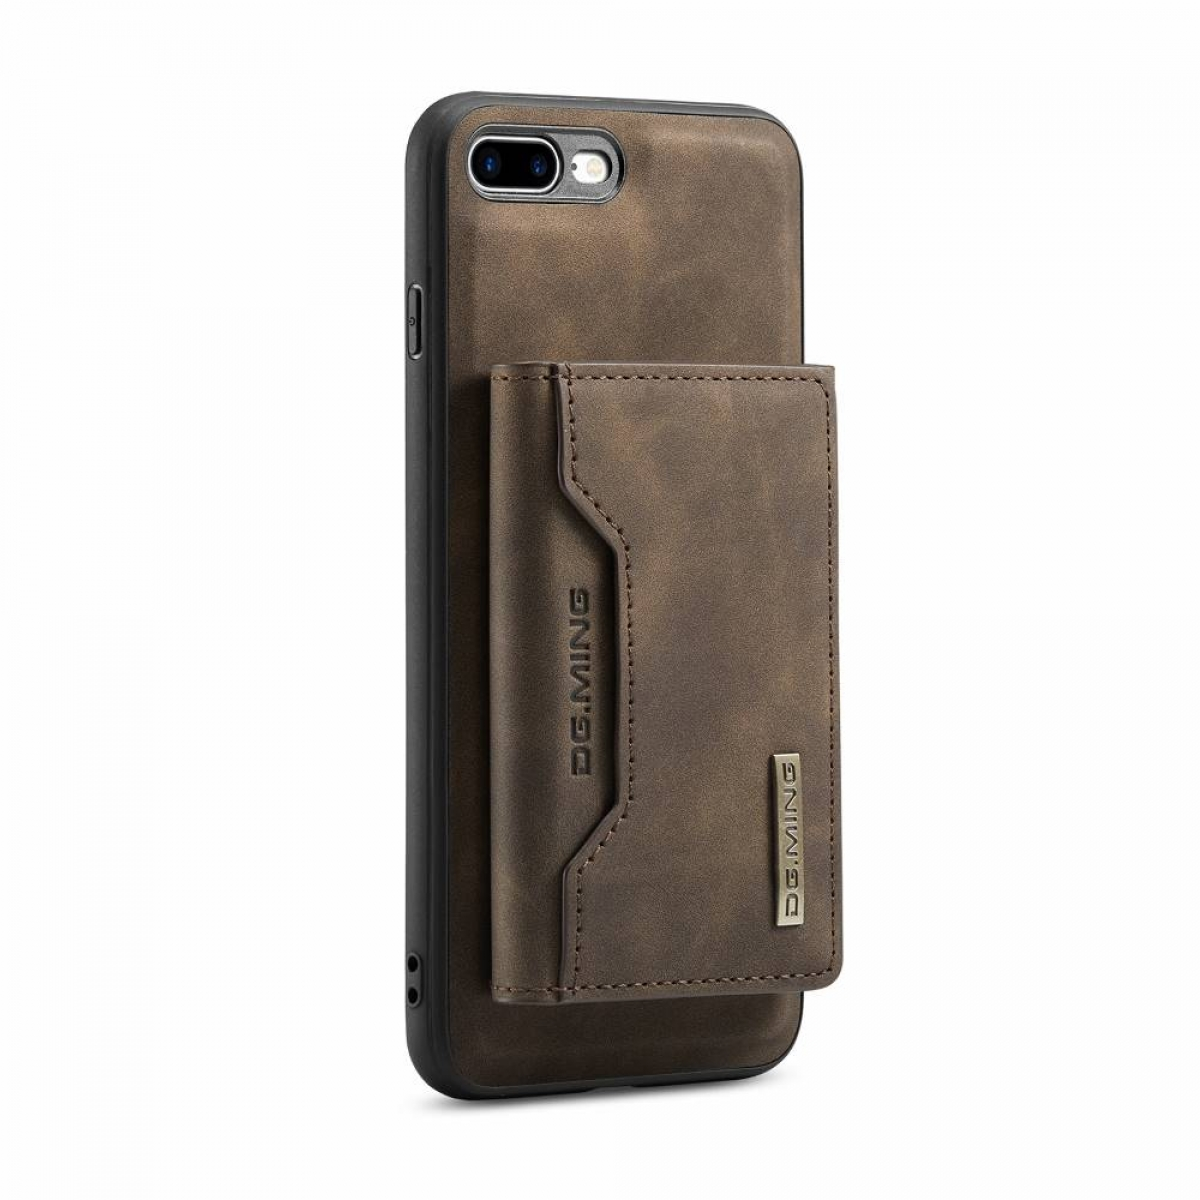 Backcover, 7 DG Apple, iPhone M2 Coffee Plus, 2in1, MING